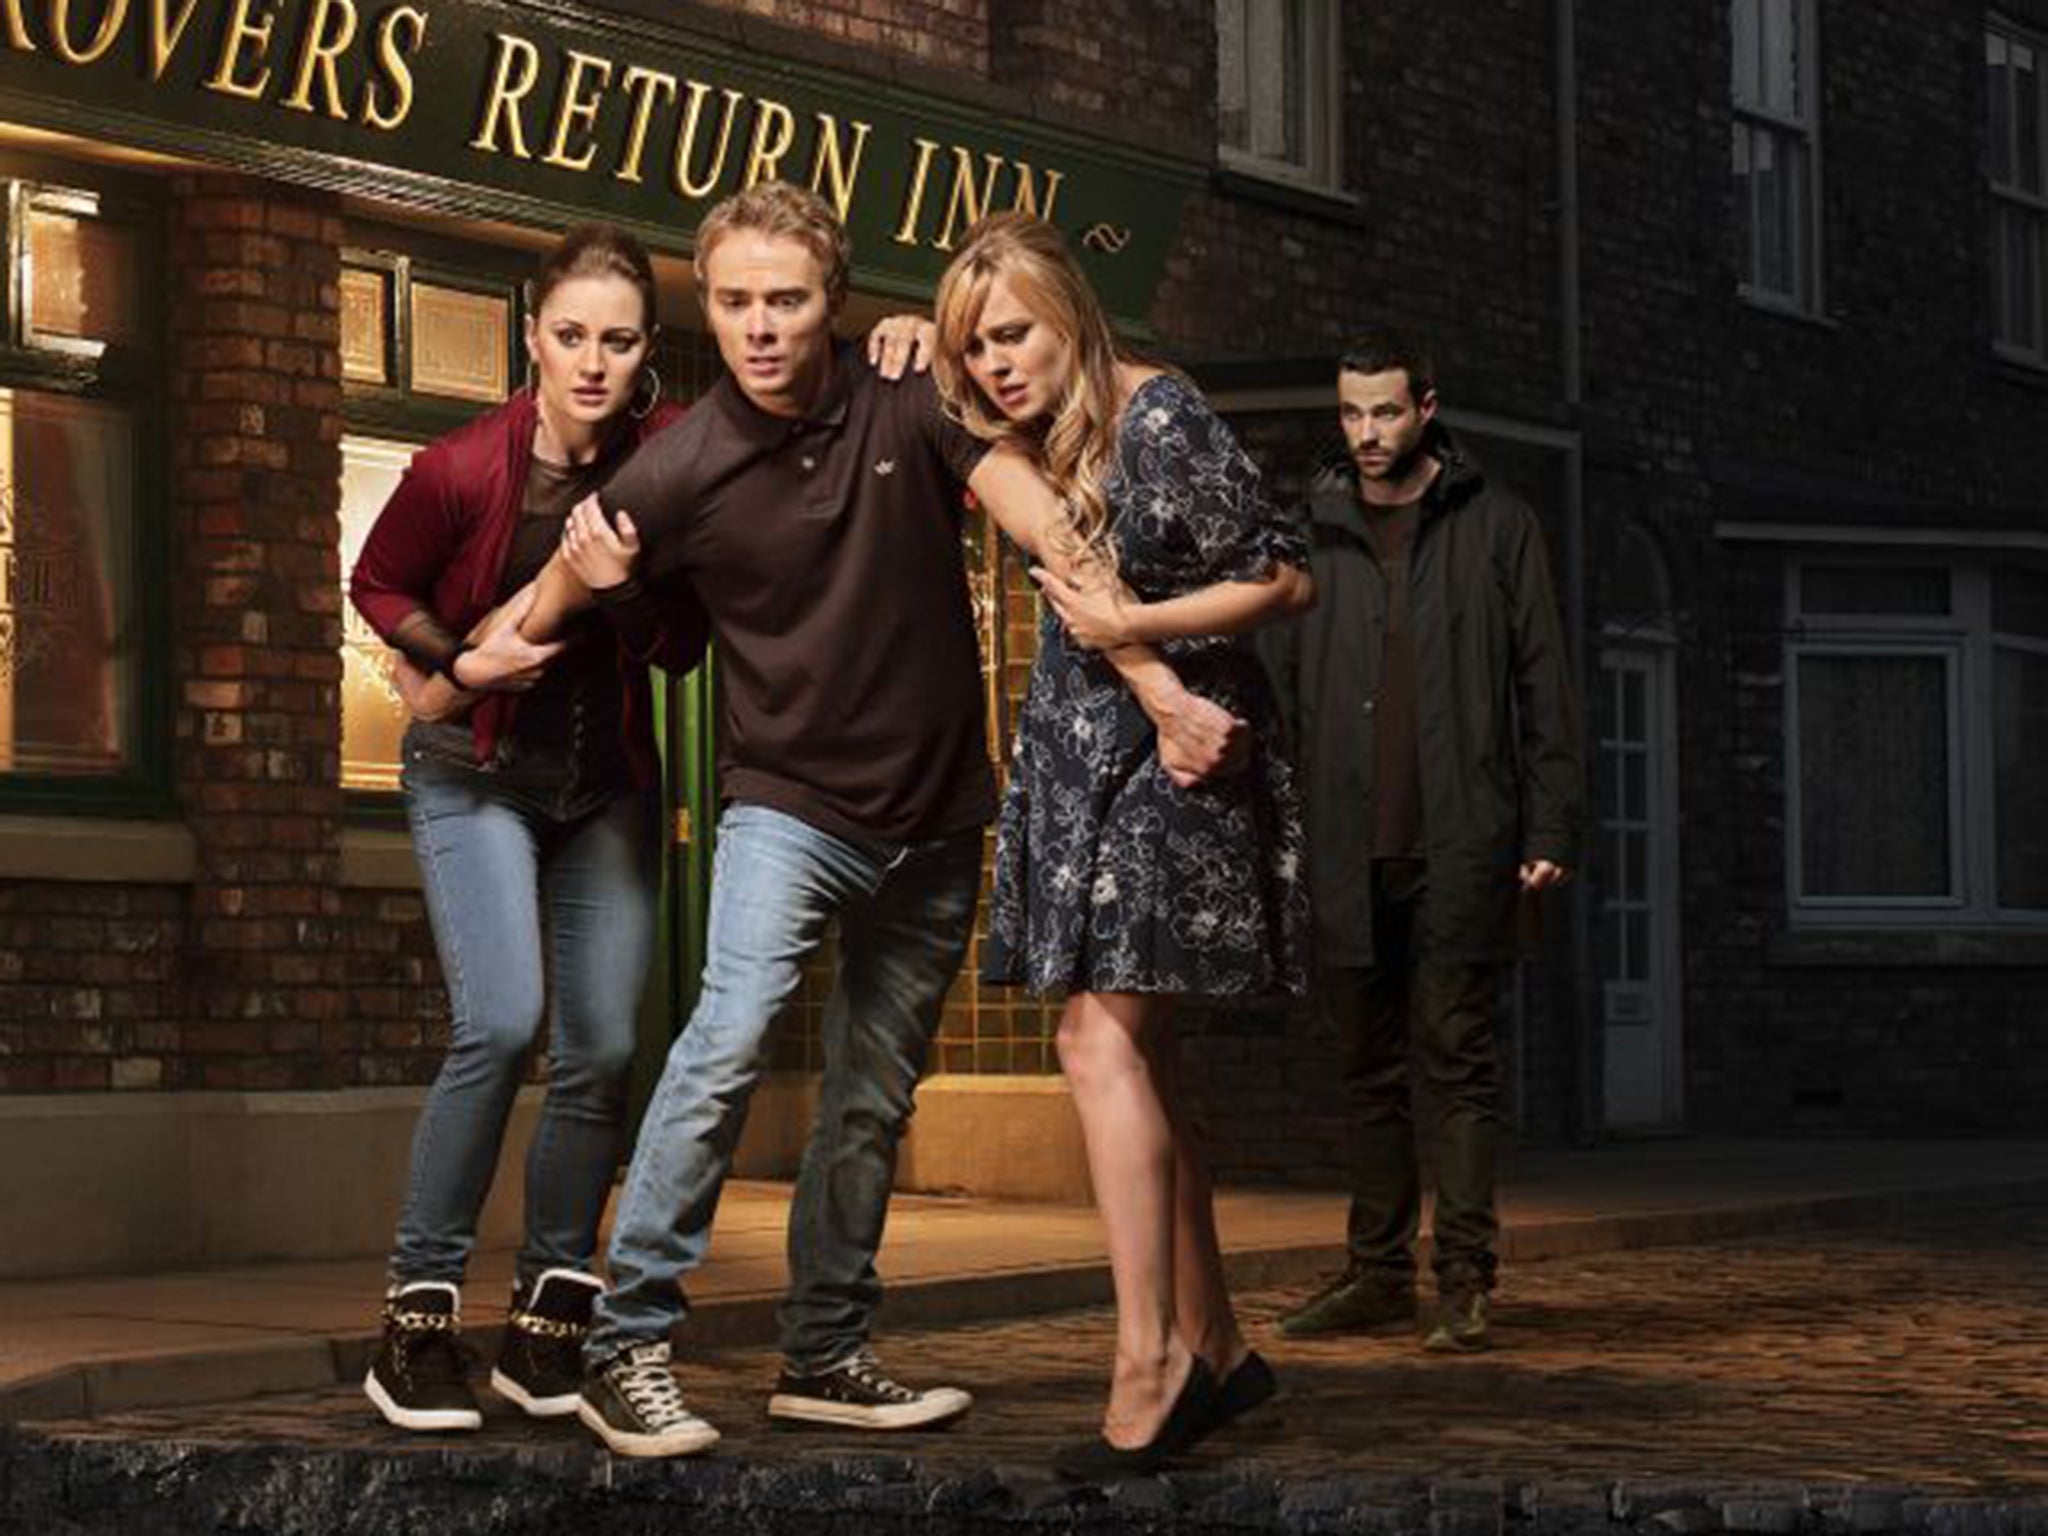 Soaps like Coronation Street helped ITV snap up more advertising revenue